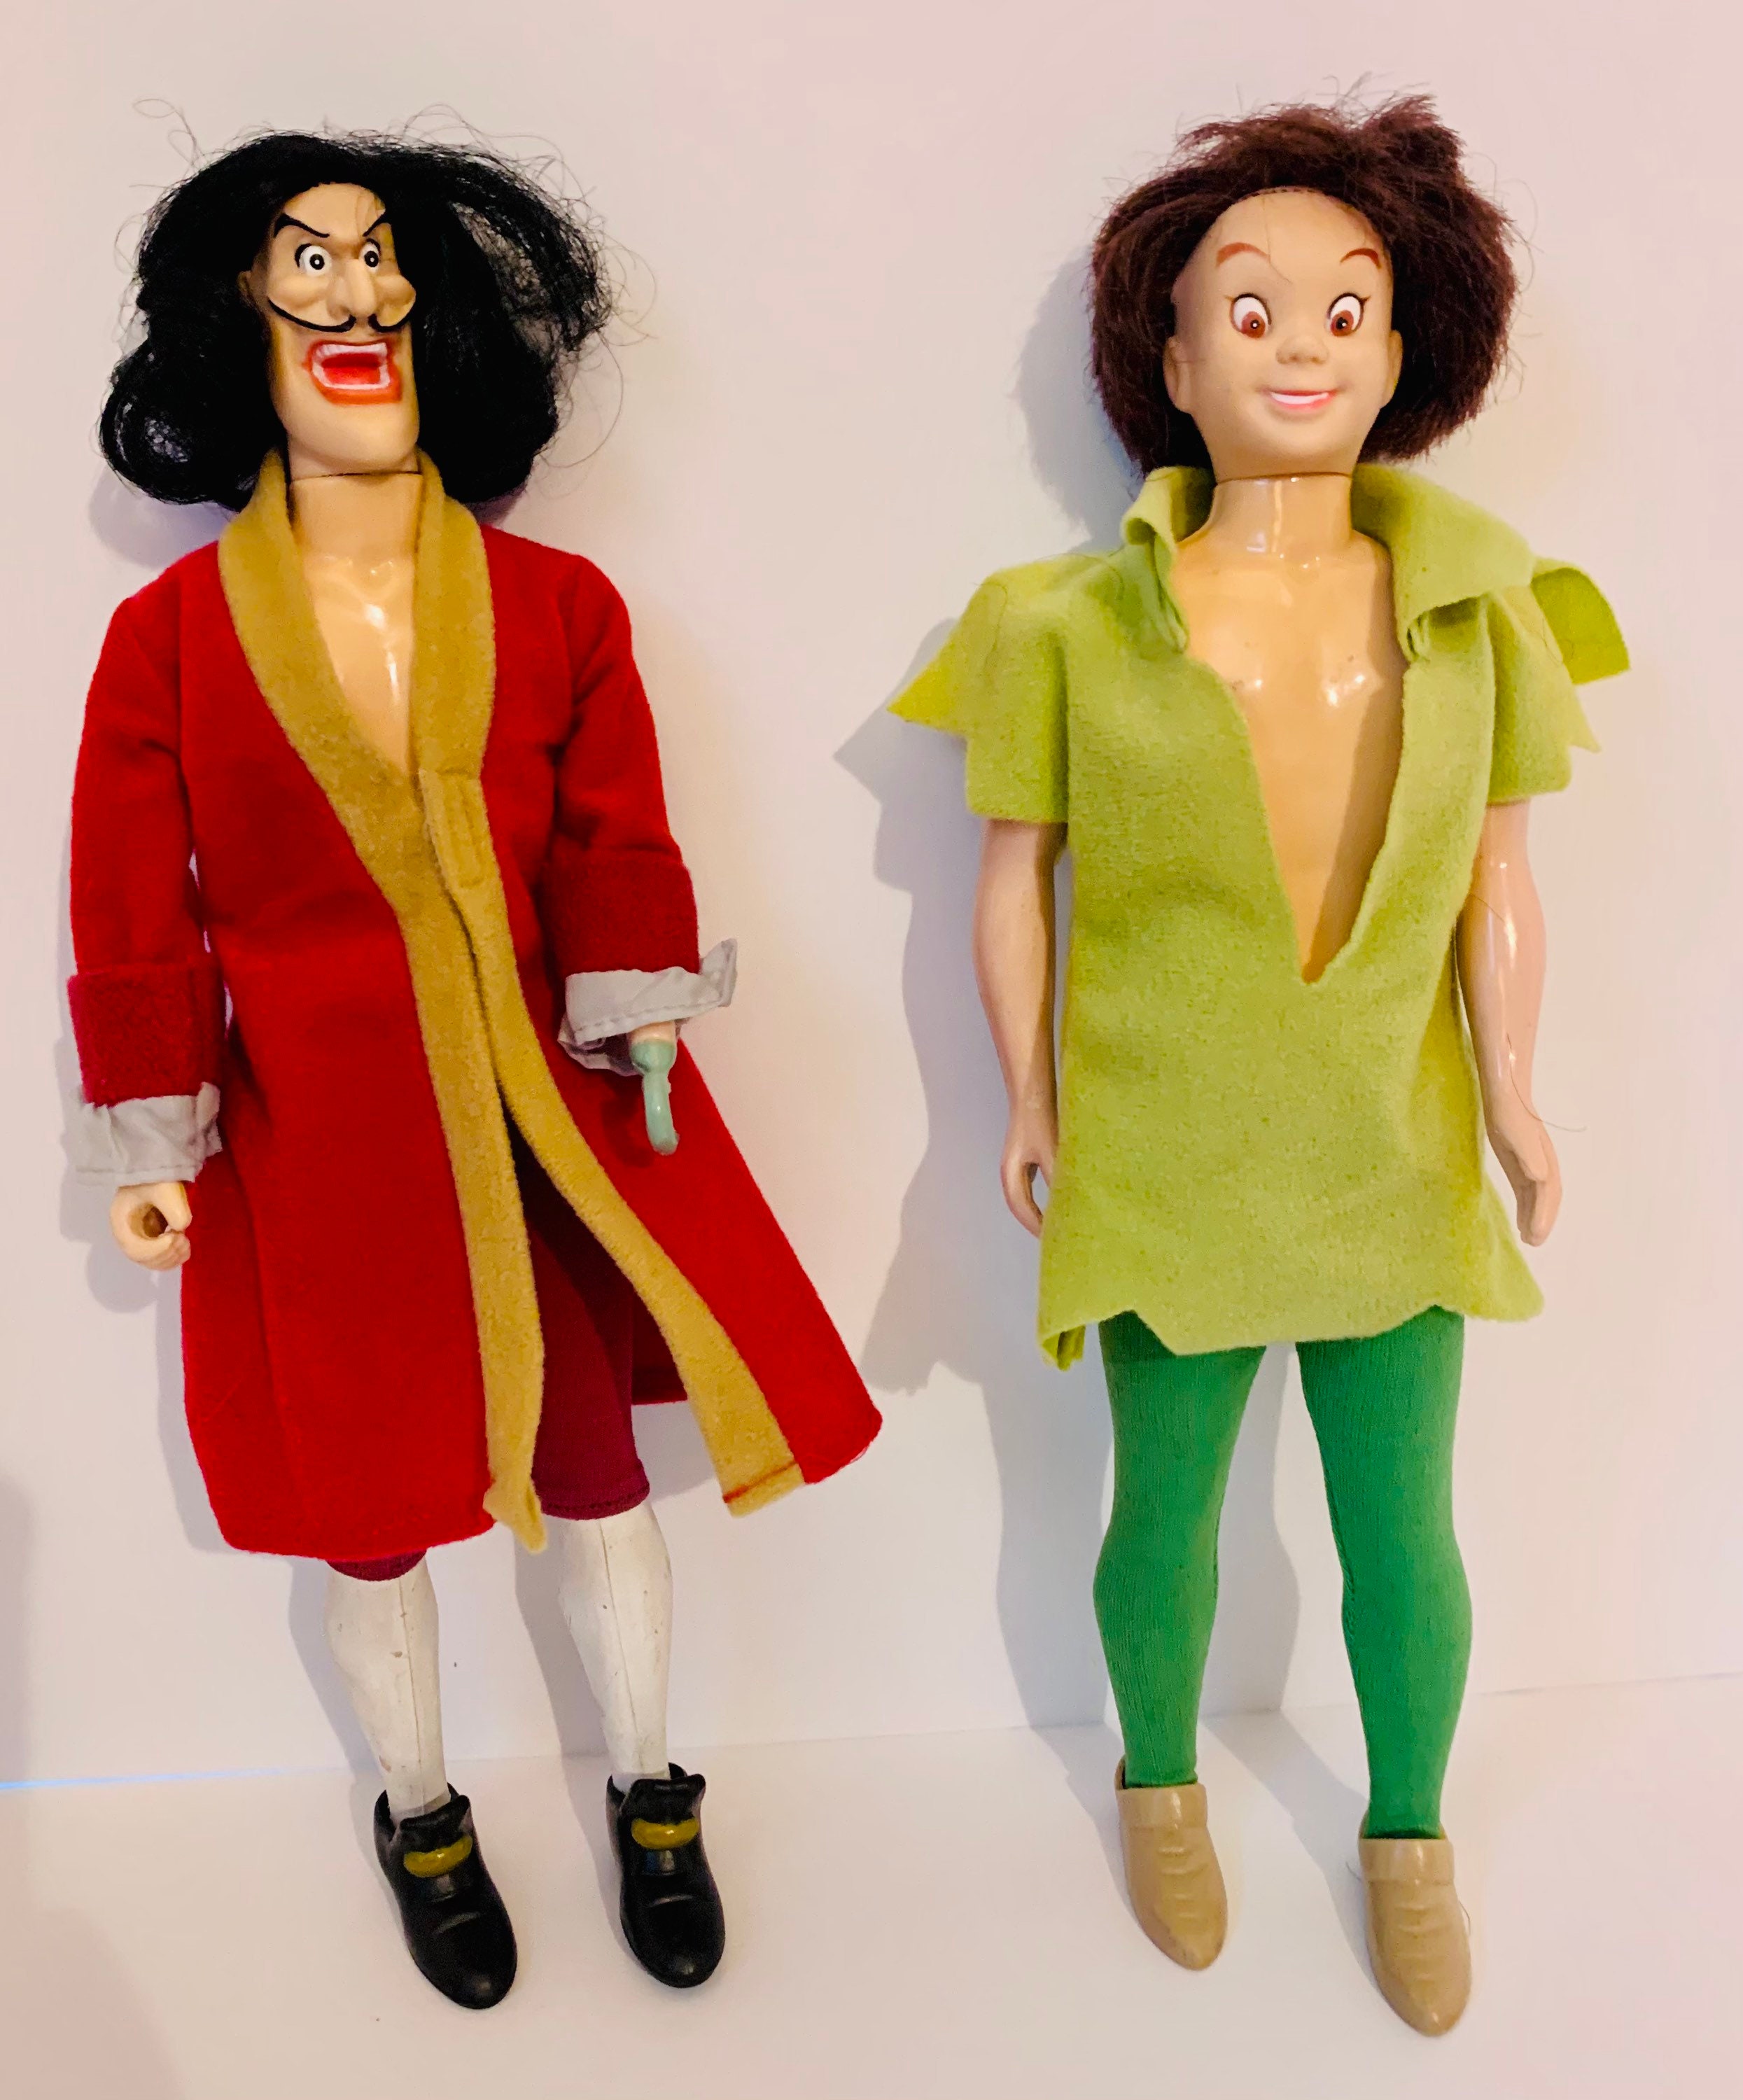 Vintage Captain Hook and Peter Pan Dolls 80s Era Sears Dolls Nostalgic  Disney 13 Bend and Snap Knees -  Canada